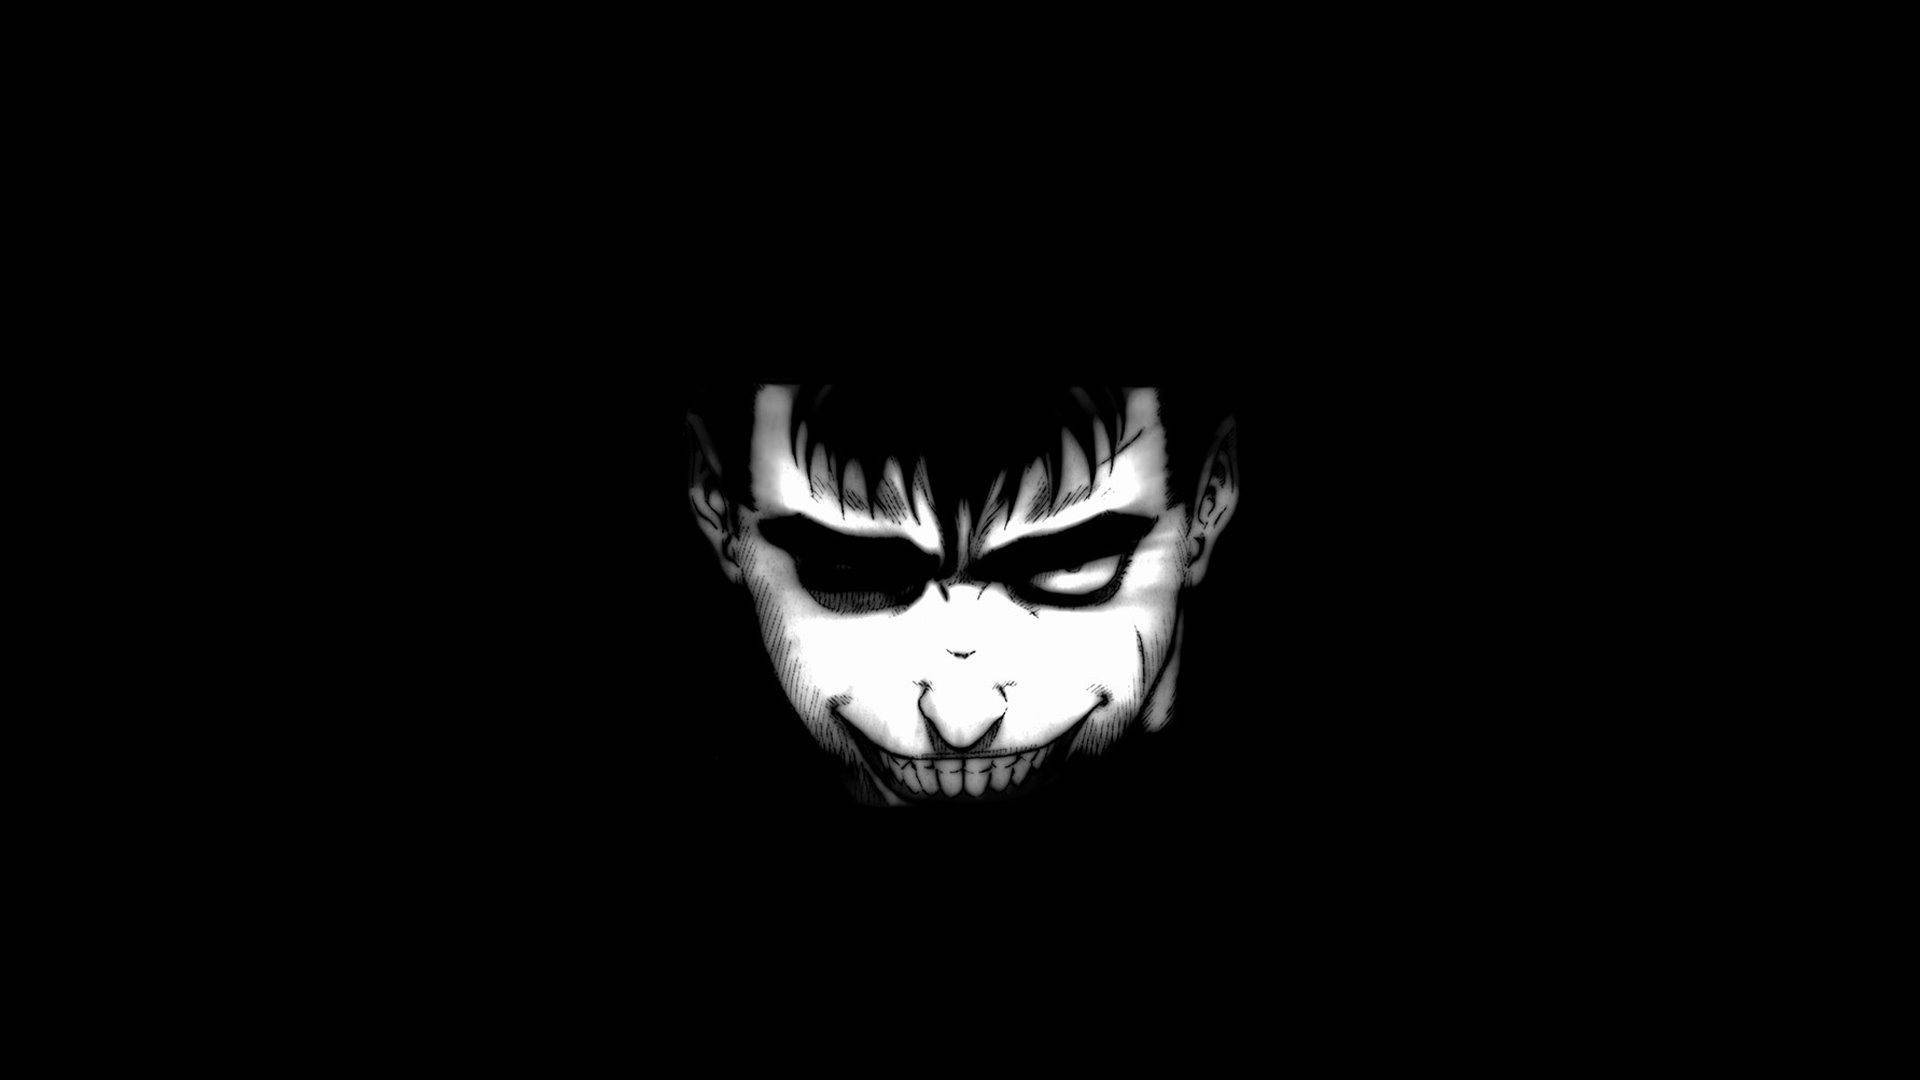 iPhone6papers.com | iPhone 6 wallpaper | bf23-horror-scary-face-dark -anime-eye-art